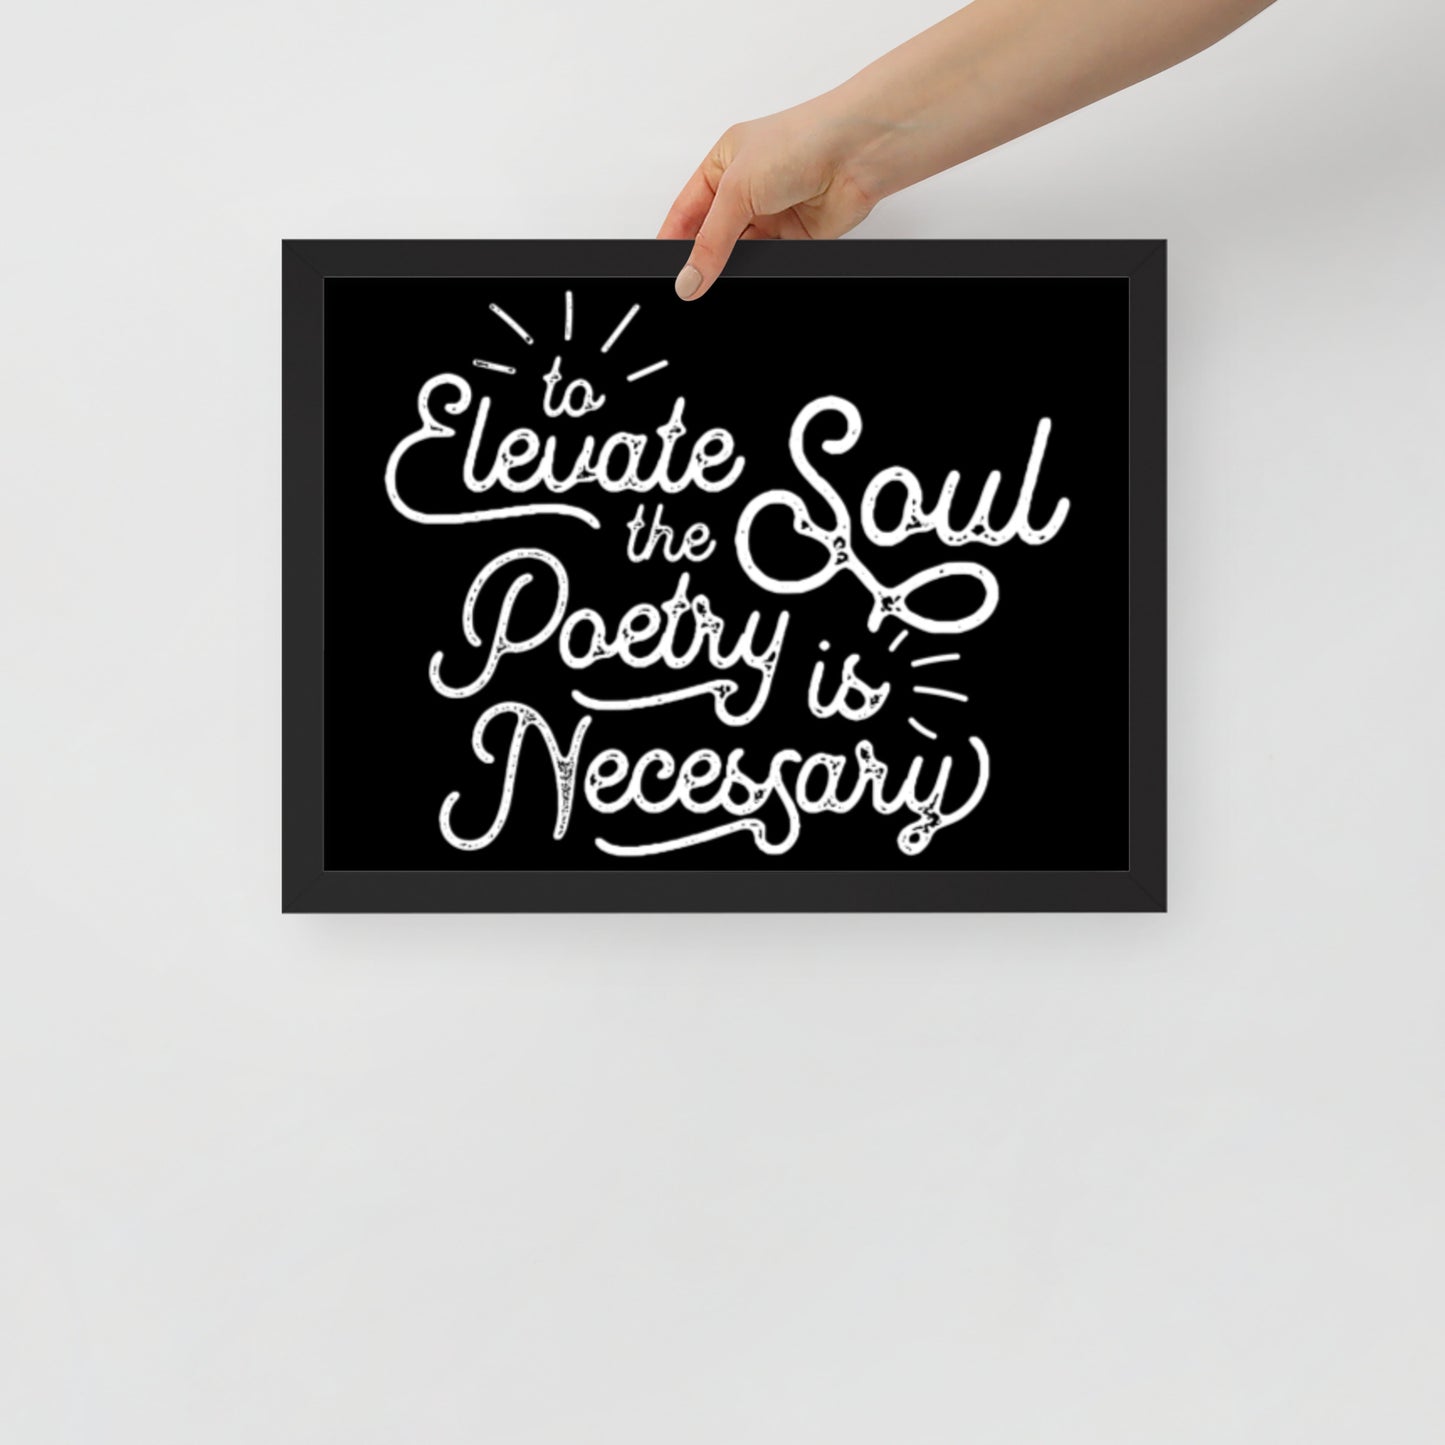 To Elevate the Soul Poetry is Necessary Framed Poster - 12 x 16 Black Frame